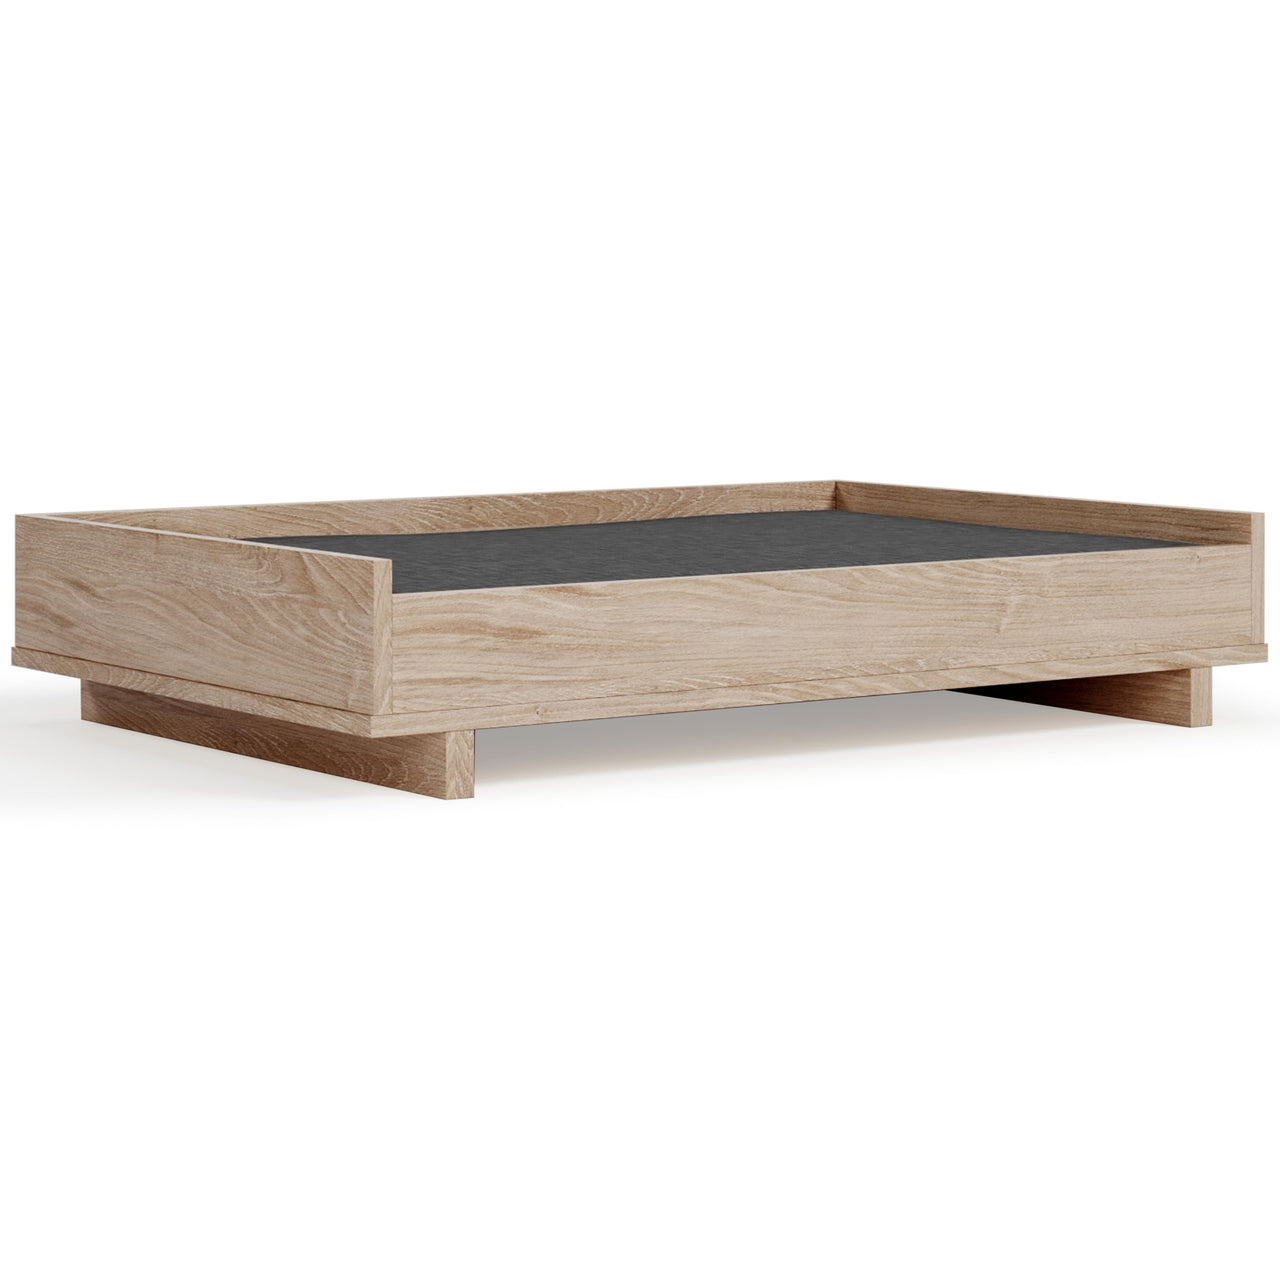 Oliah - Natural - Pet Bed Frame Tony's Home Furnishings Furniture. Beds. Dressers. Sofas.